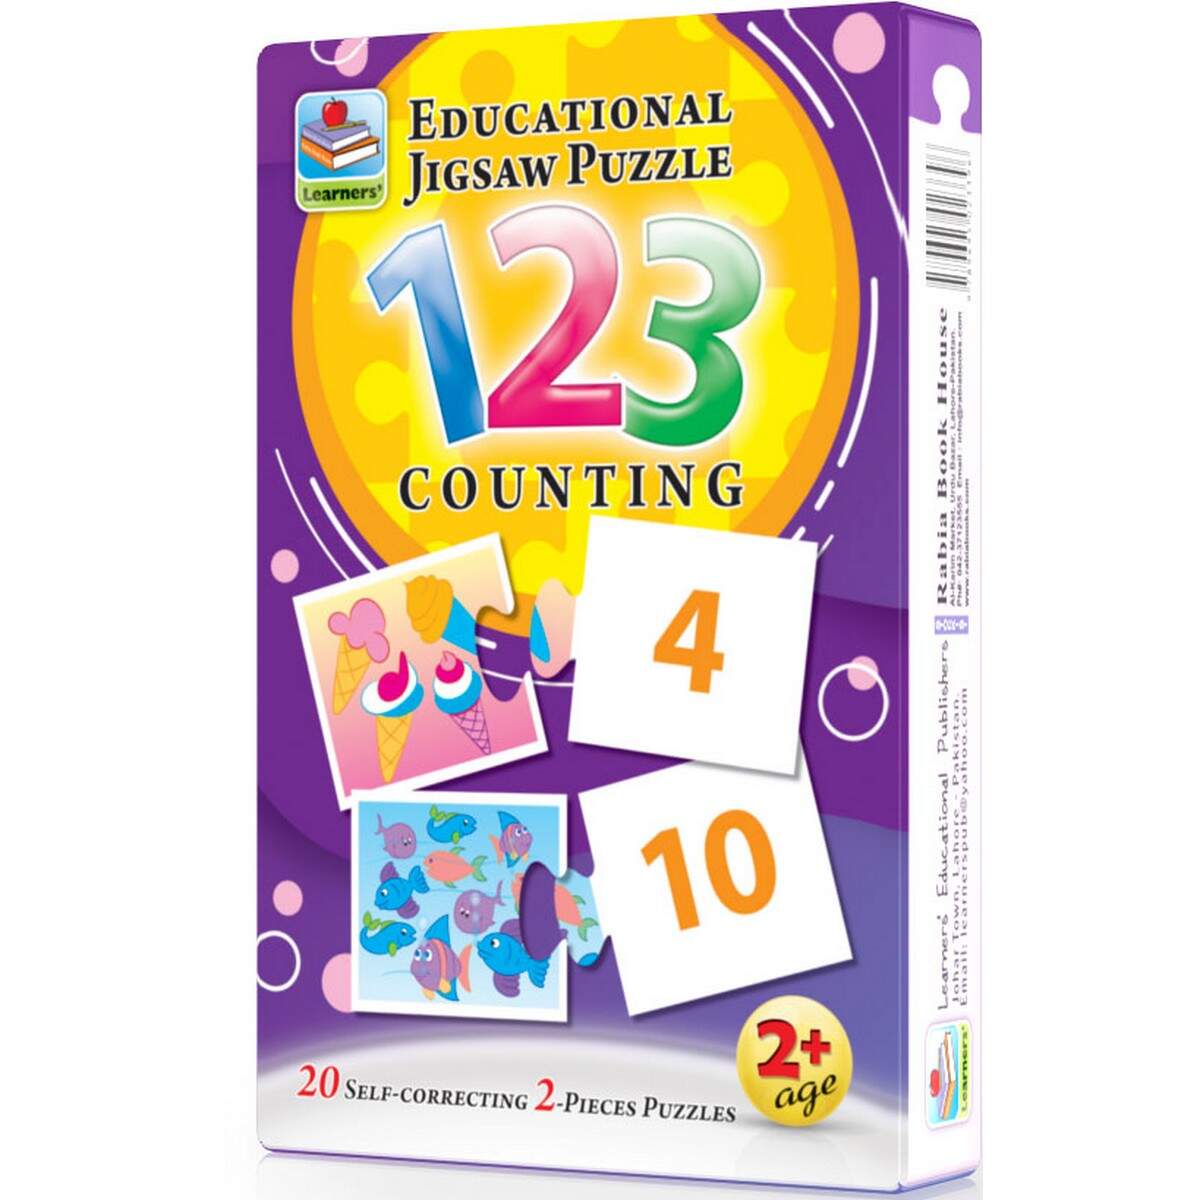 Counting Educational Jigsaw Puzzles